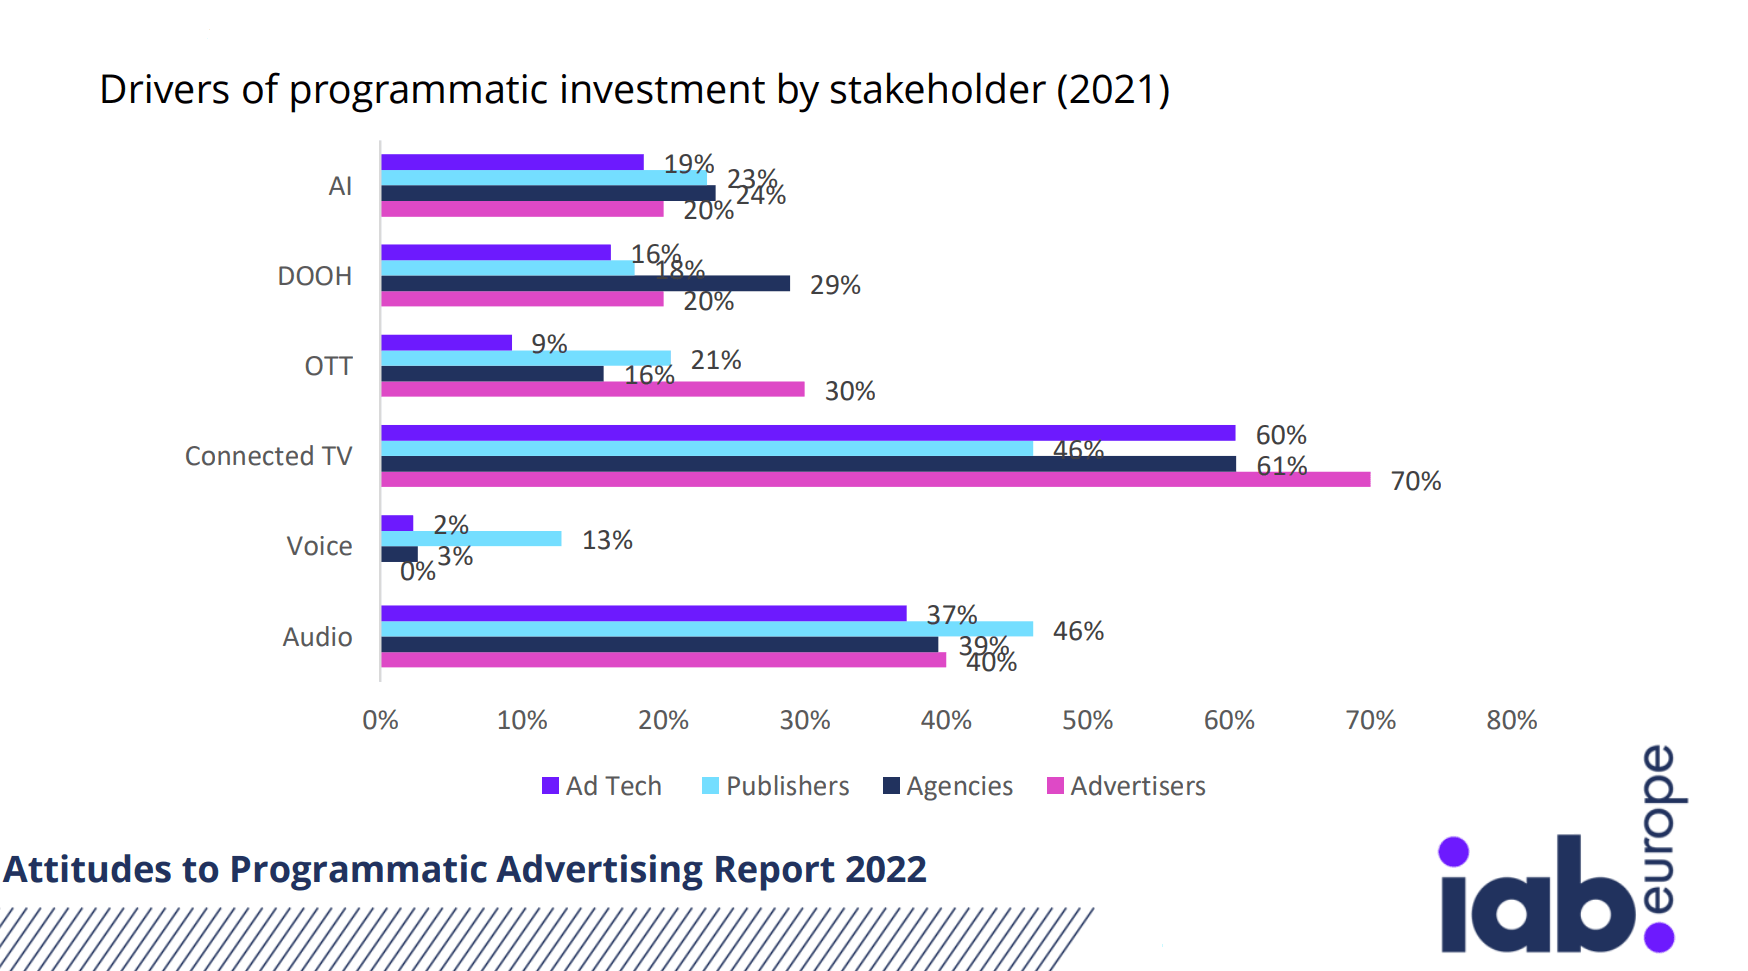 Attitudes to Programmatic Advertising Report 2022 by IAB Europe